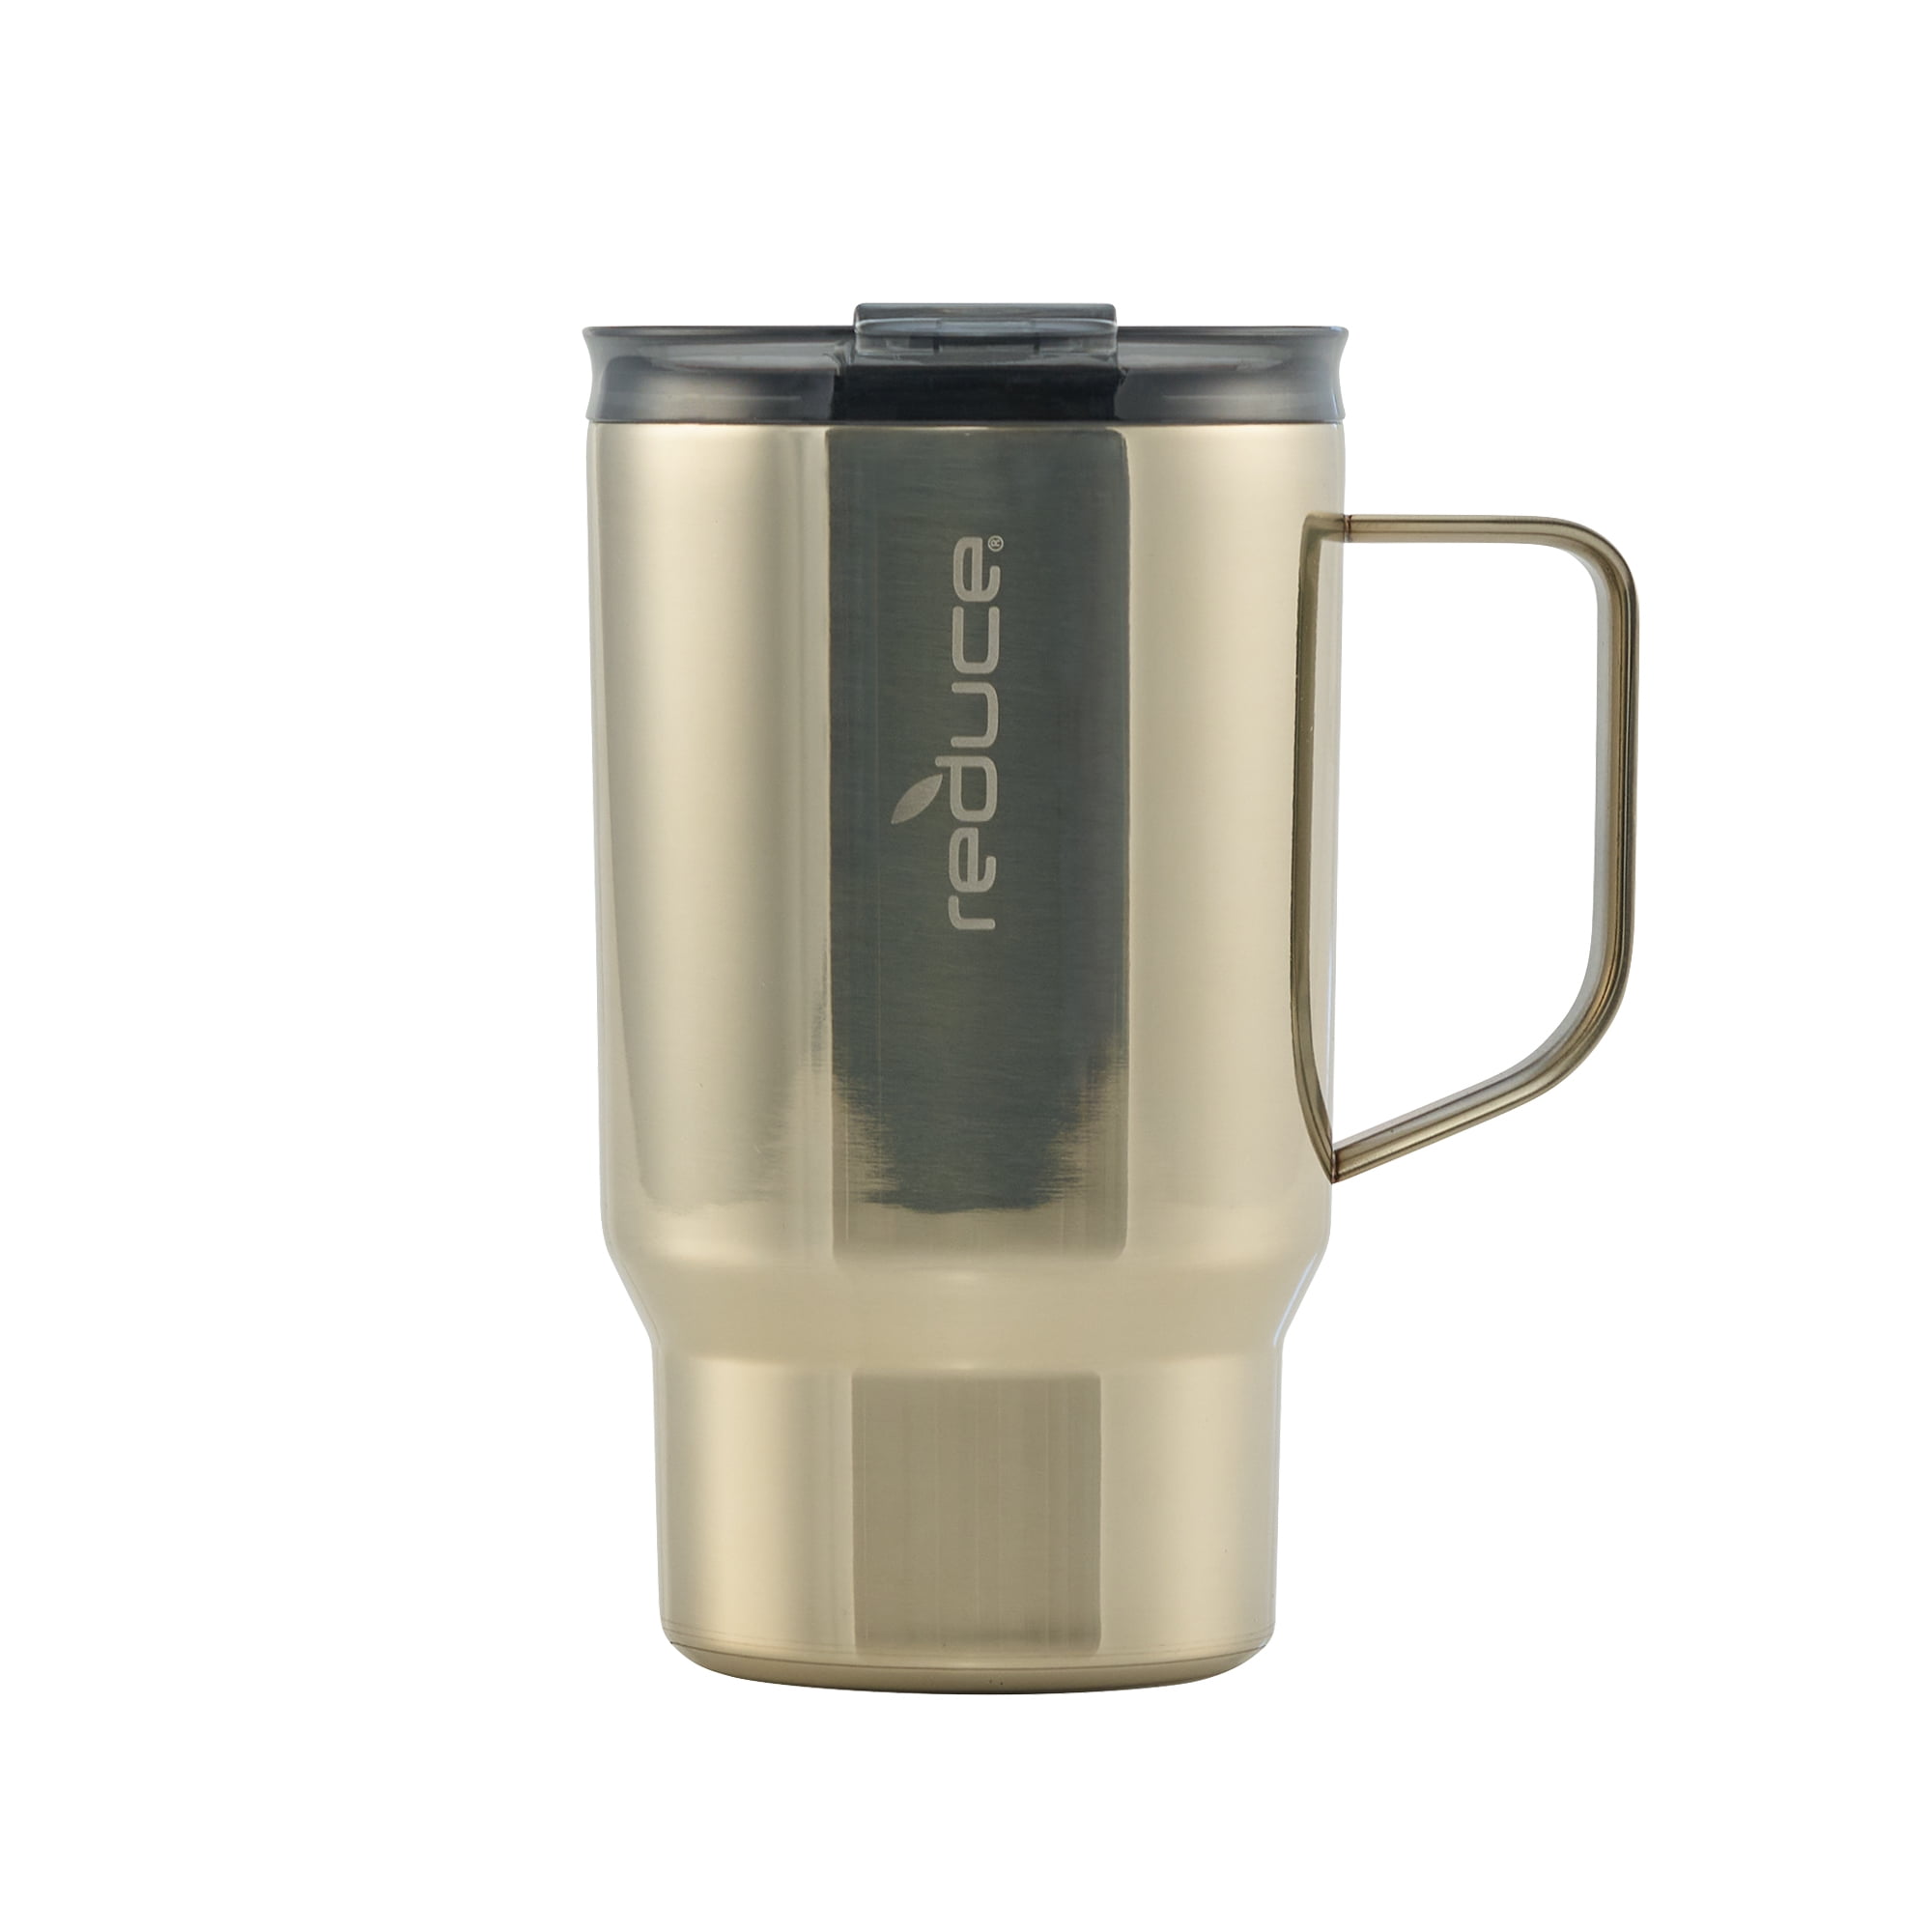 Huron 2.0 Stainless Steel Travel Mug with SNAPSEAL™Lid, 16oz